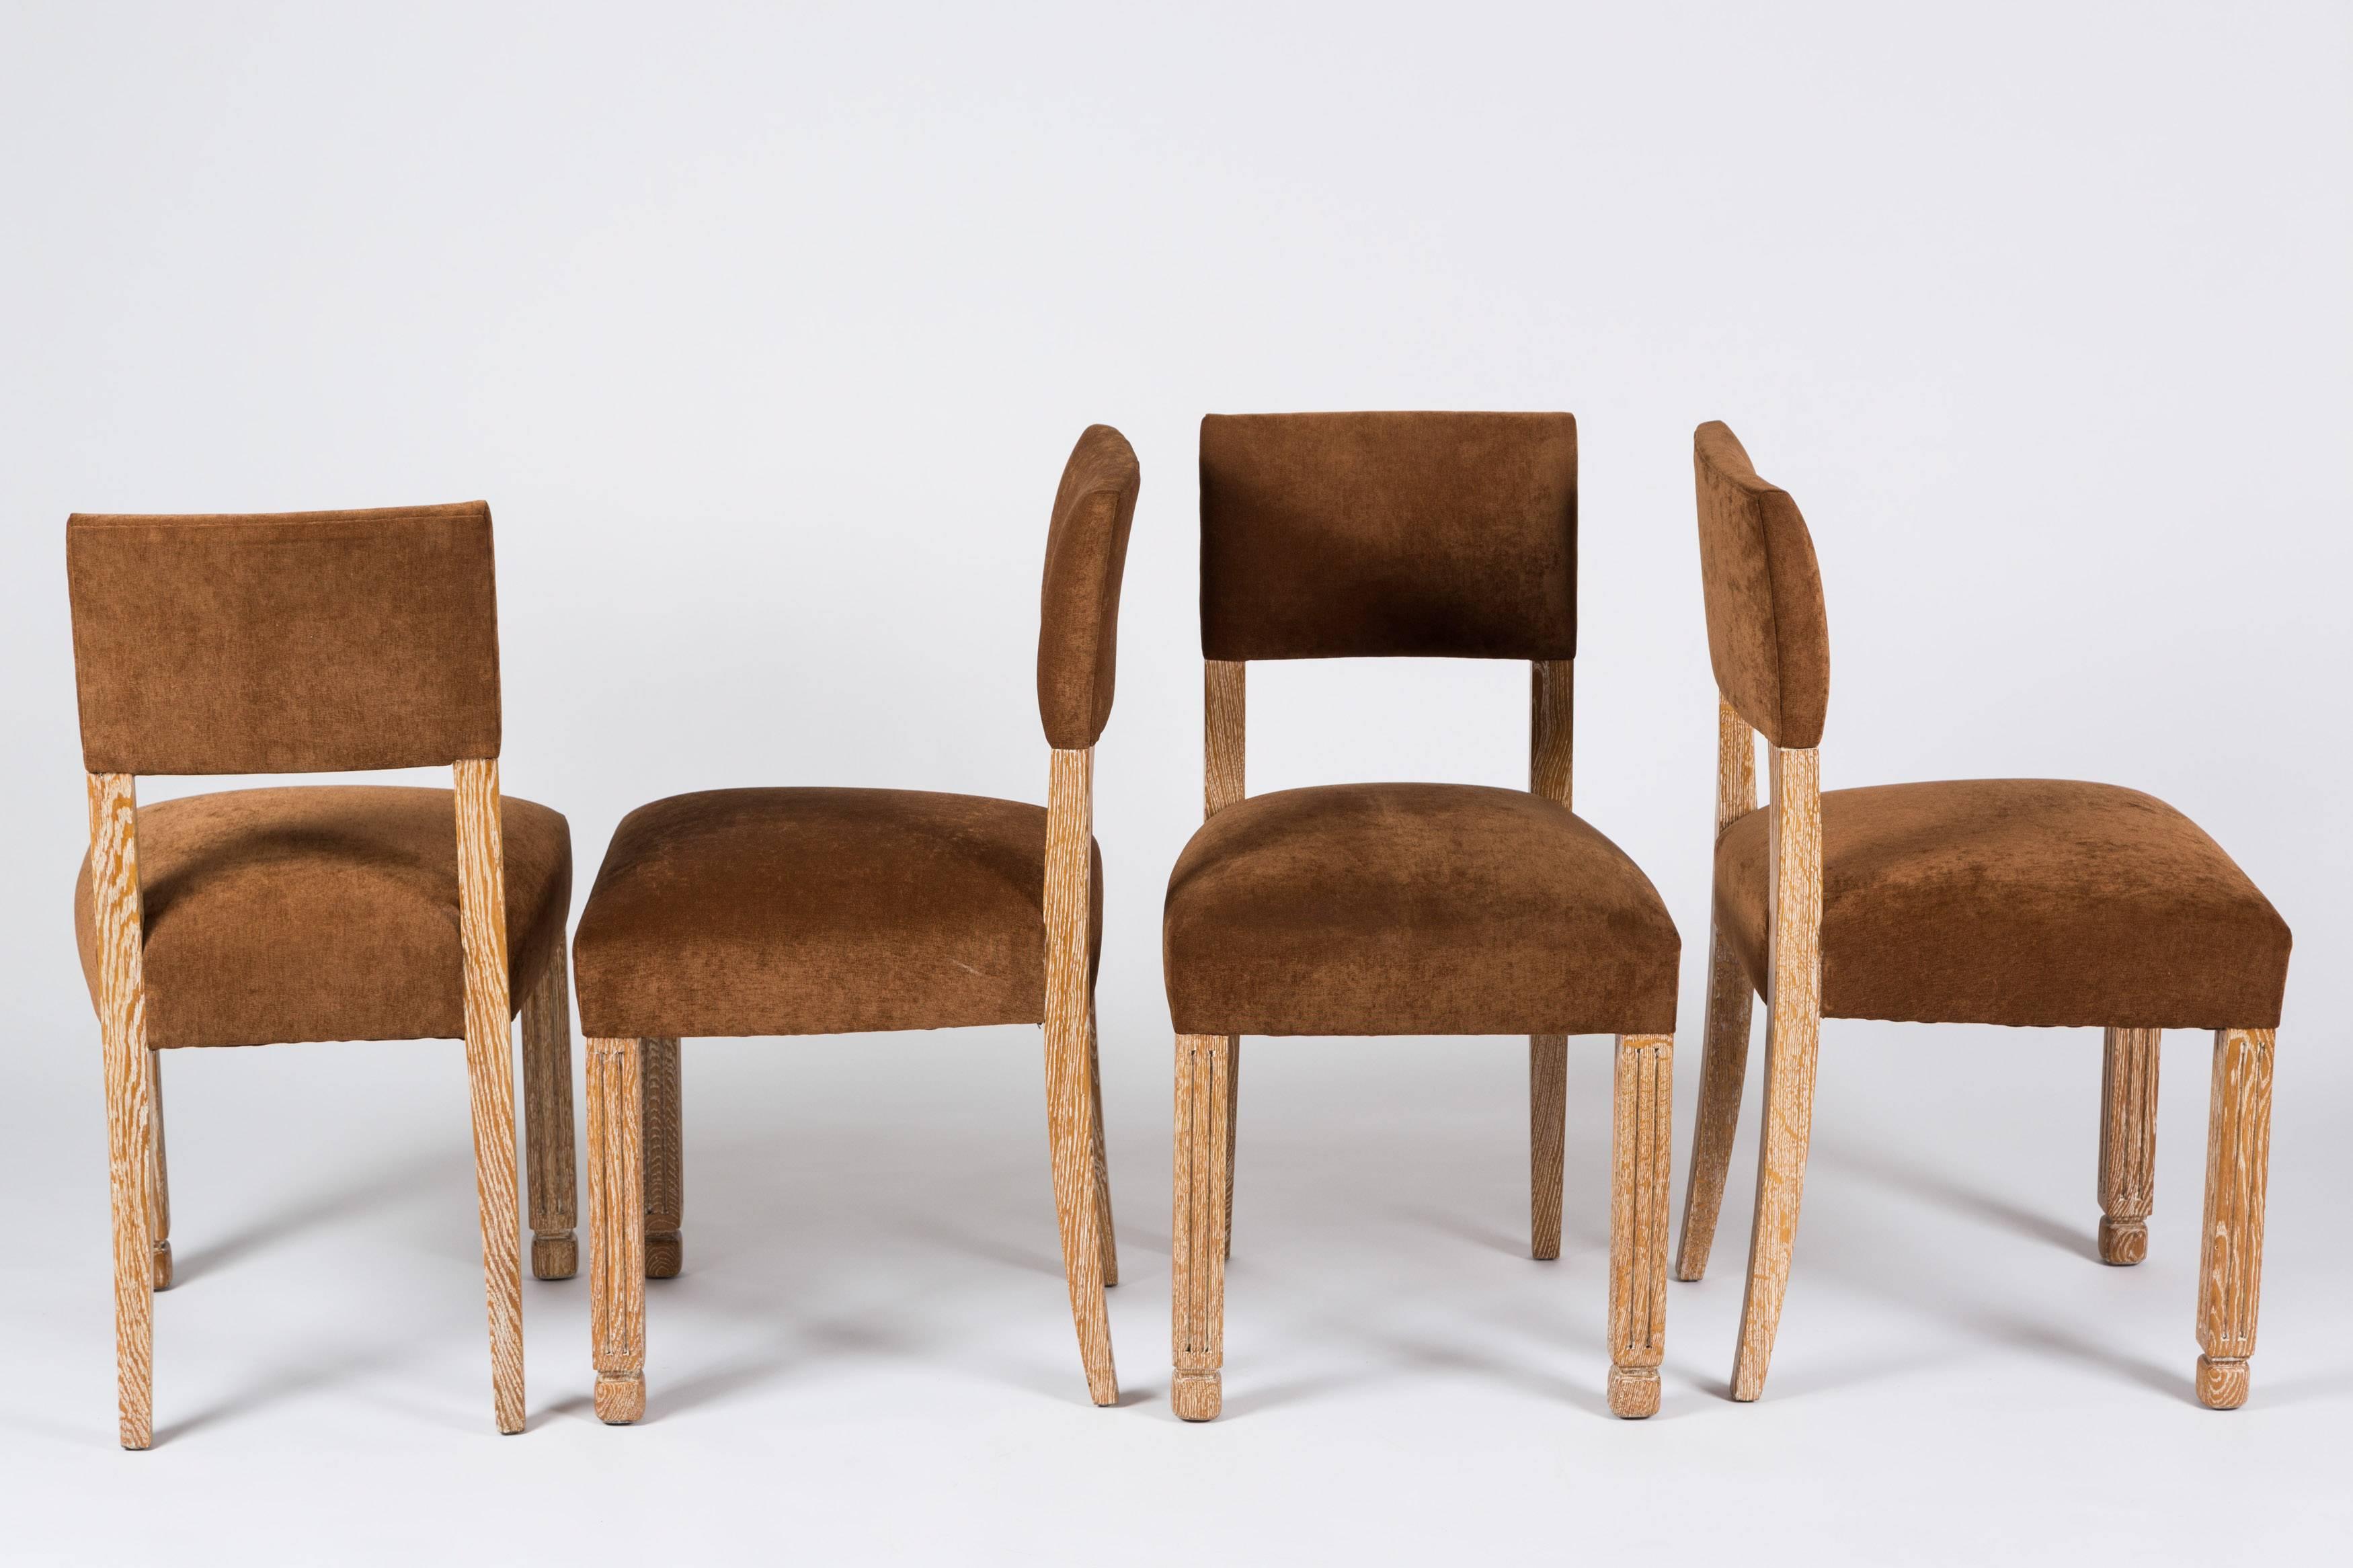 Set of four Mid-Century French limed oak chairs upholstered in caramel-colored velvet.